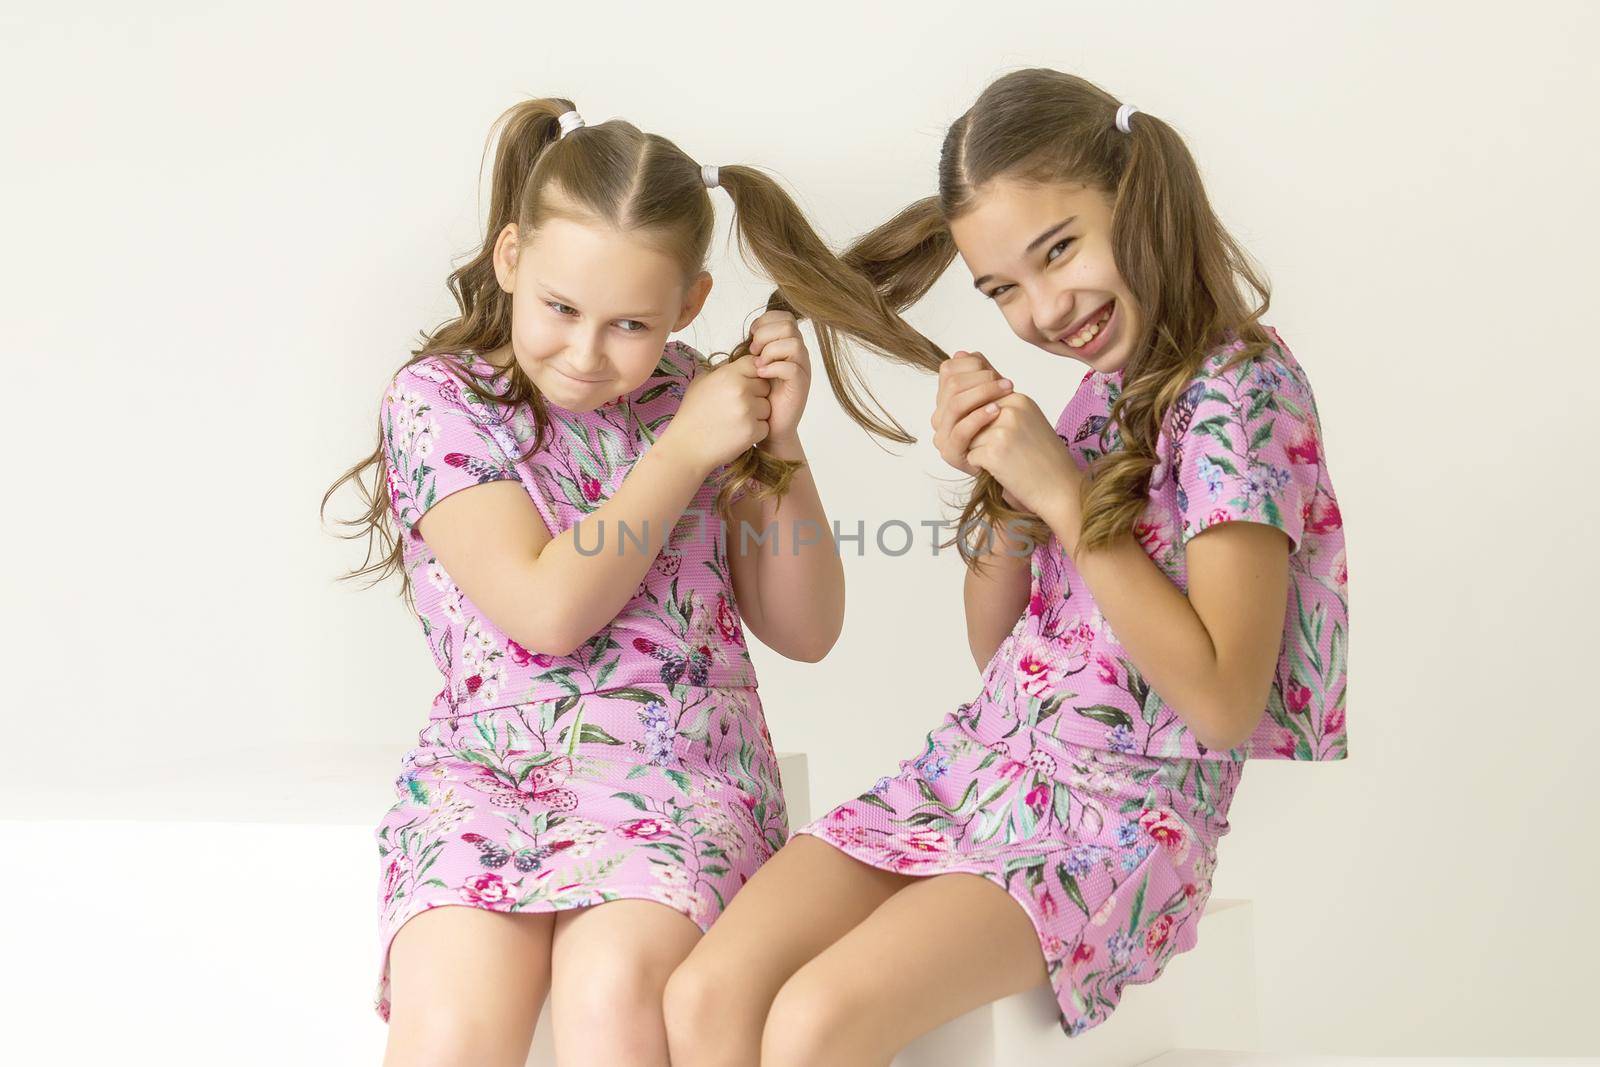 Kind funny girls pull each other for pigtails. The concept of tenderness and beauty.